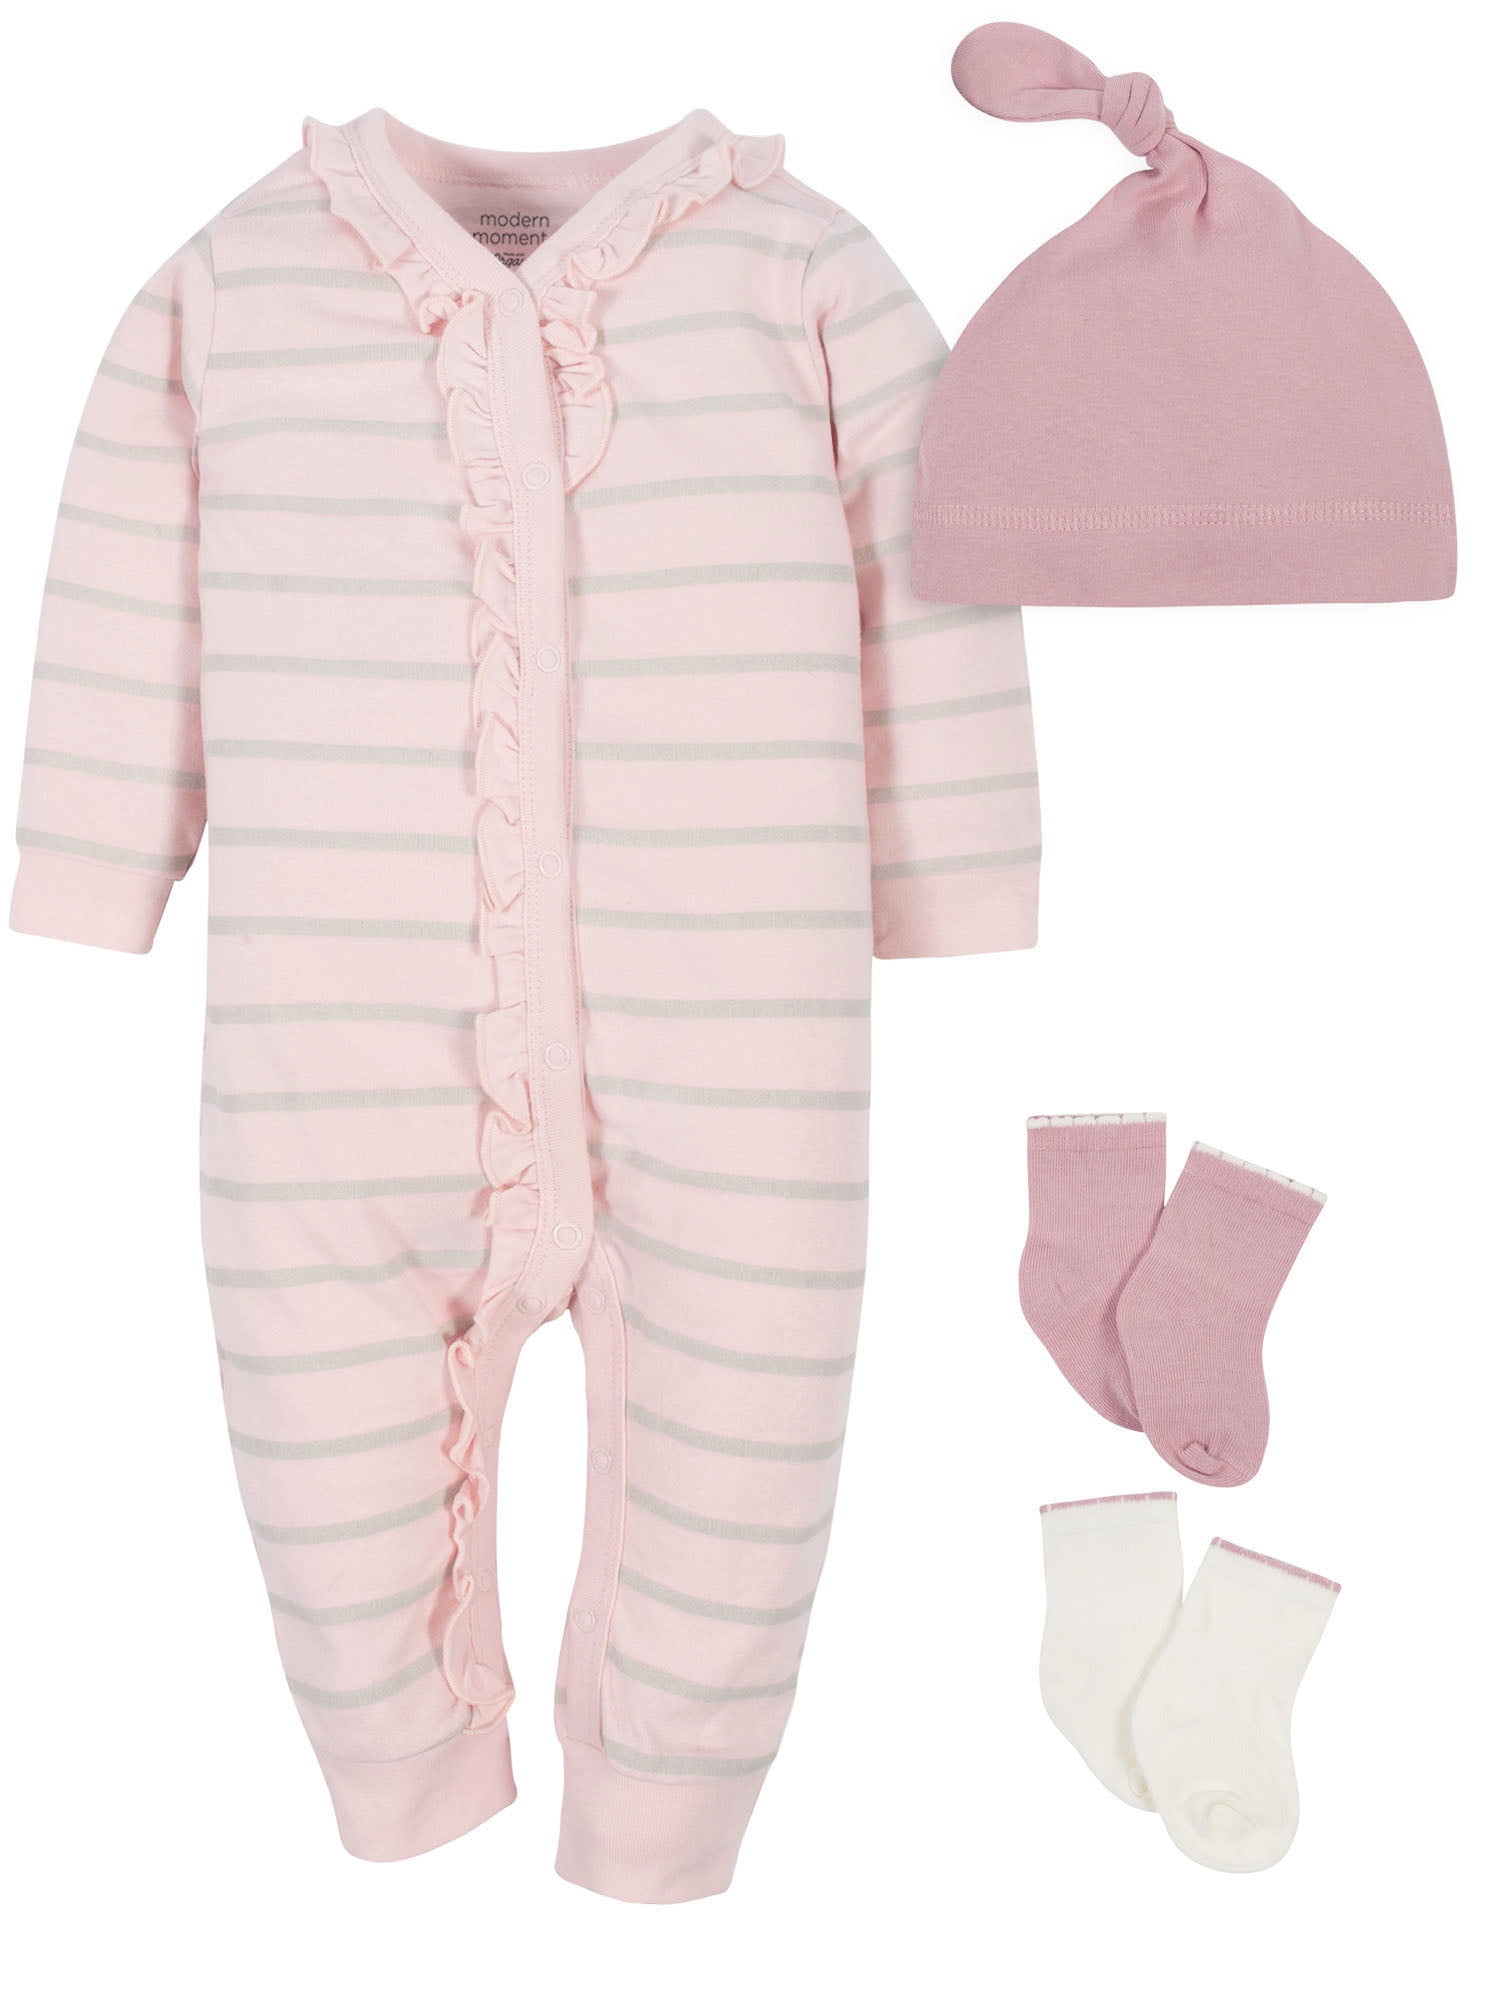 Buy Modern Moments by Gerber Baby Girl Coverall & Accessory Set, 4 ...